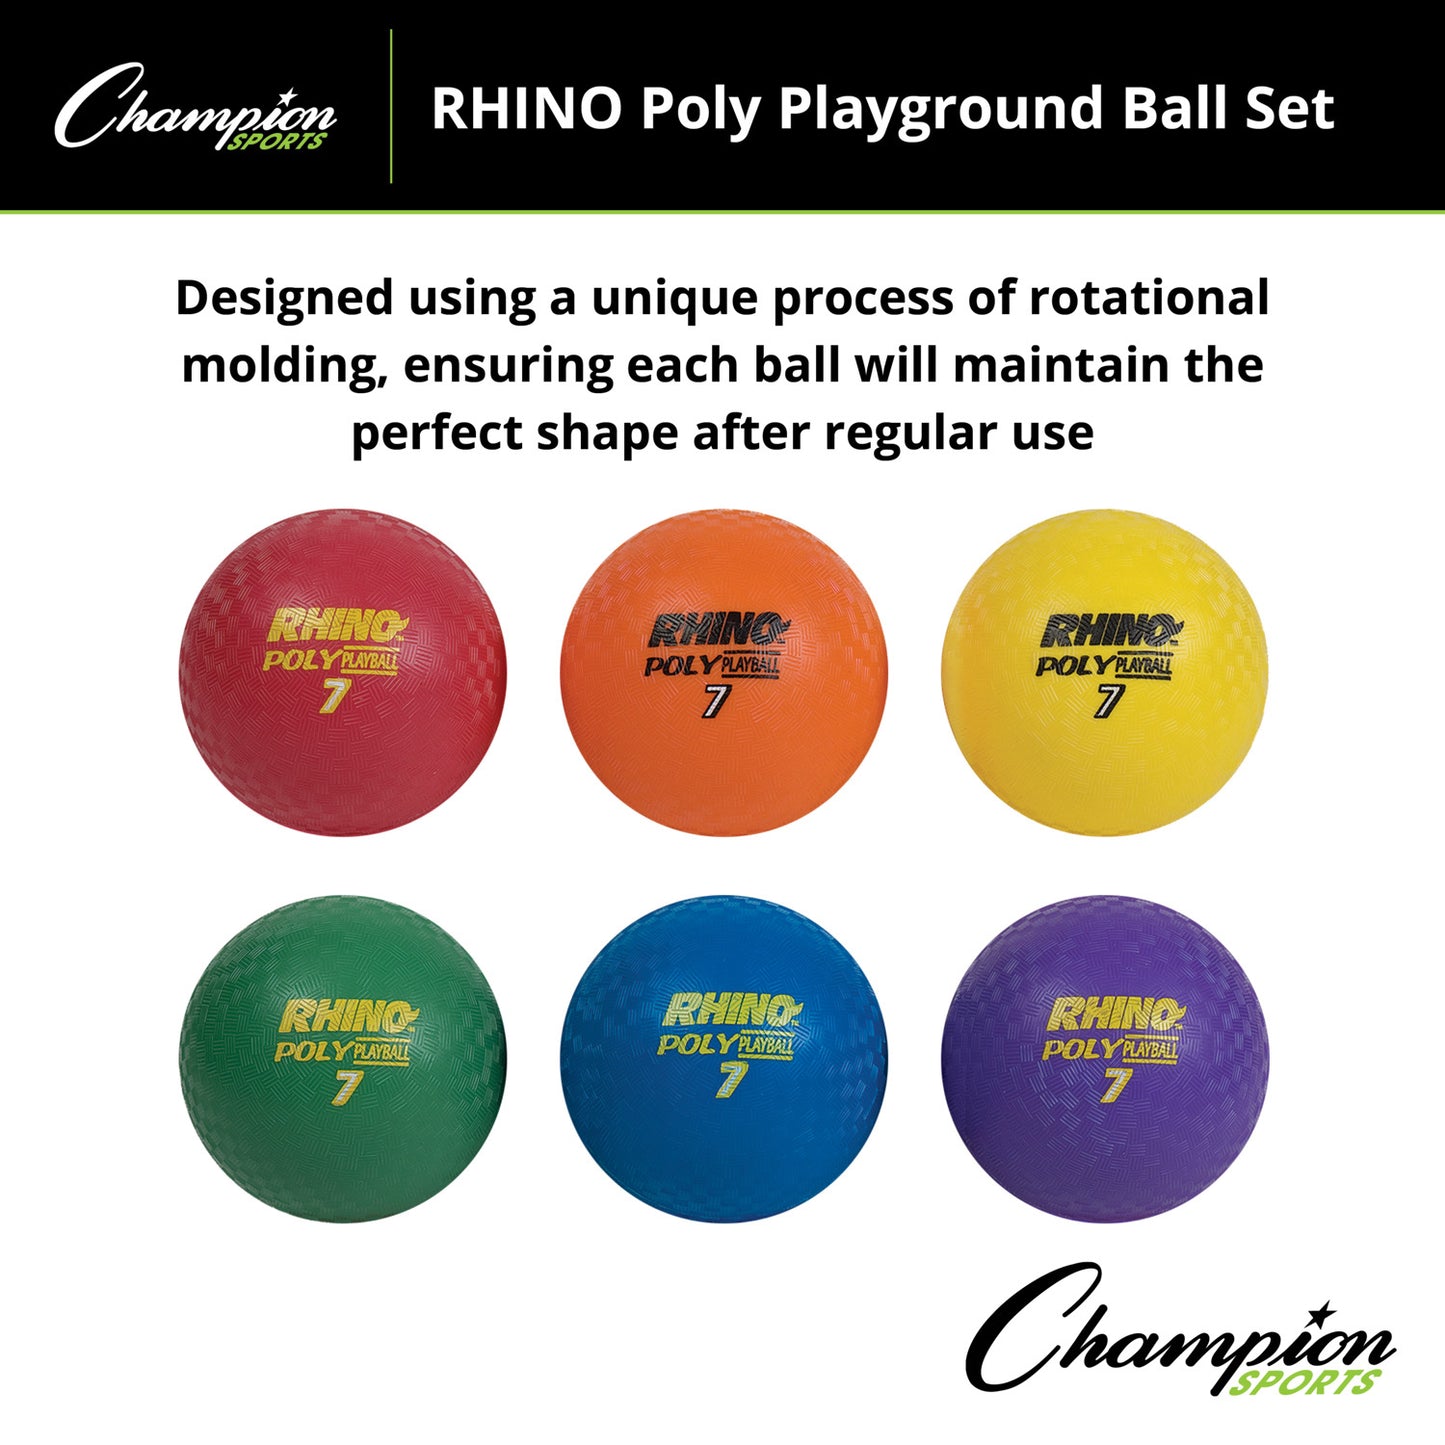 Rhino® Poly 7" Playground Ball Set, Assorted Colors, Set of 6